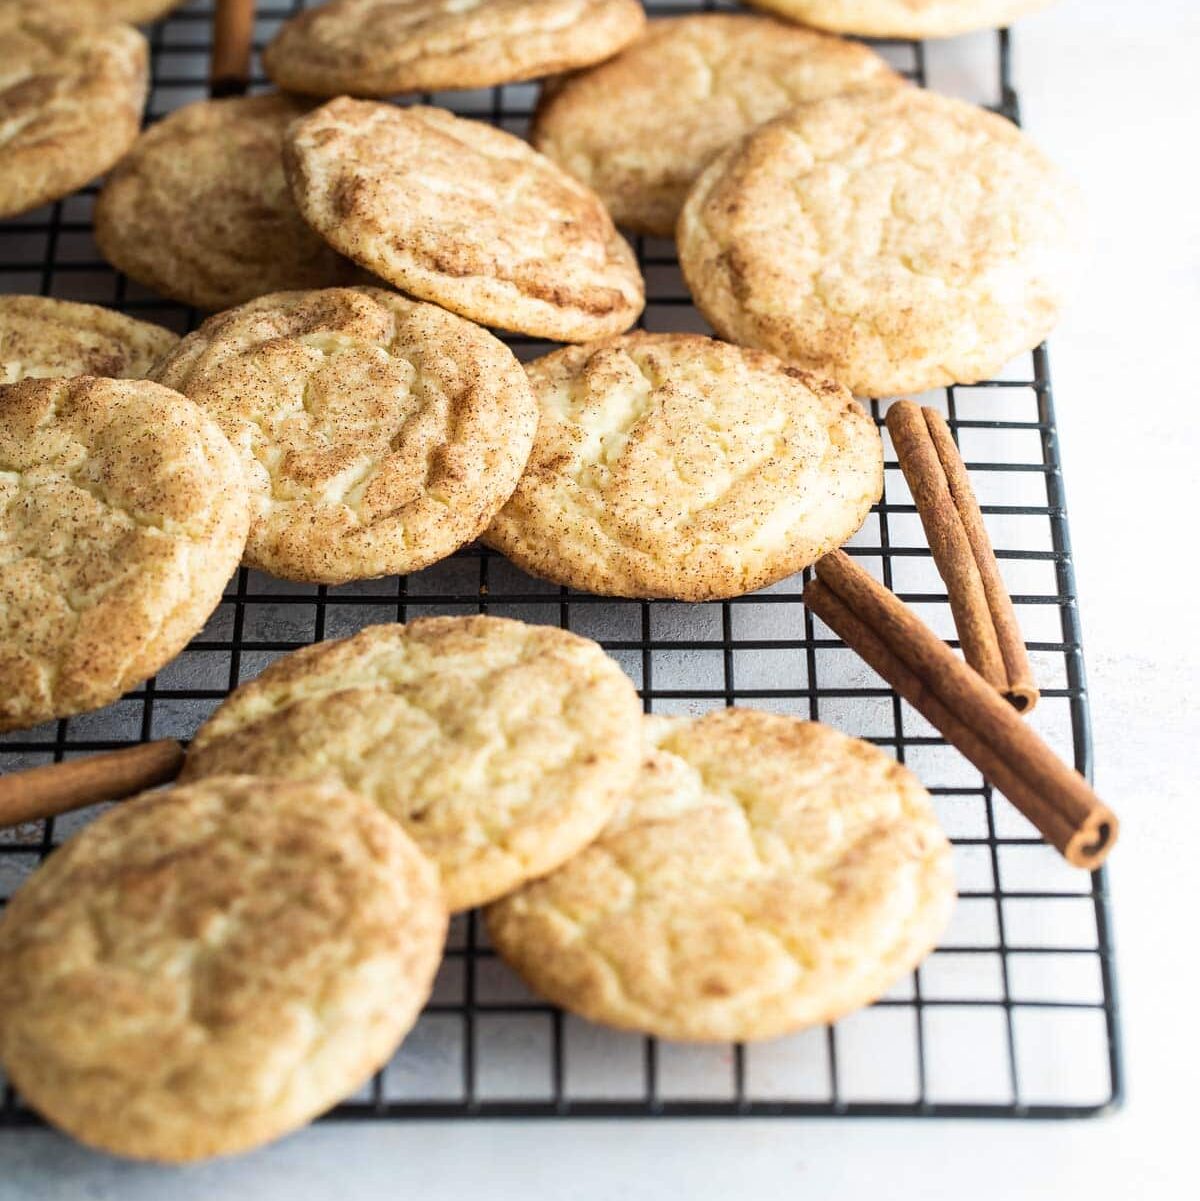 Snickerdoodle cookies on a baking rack.